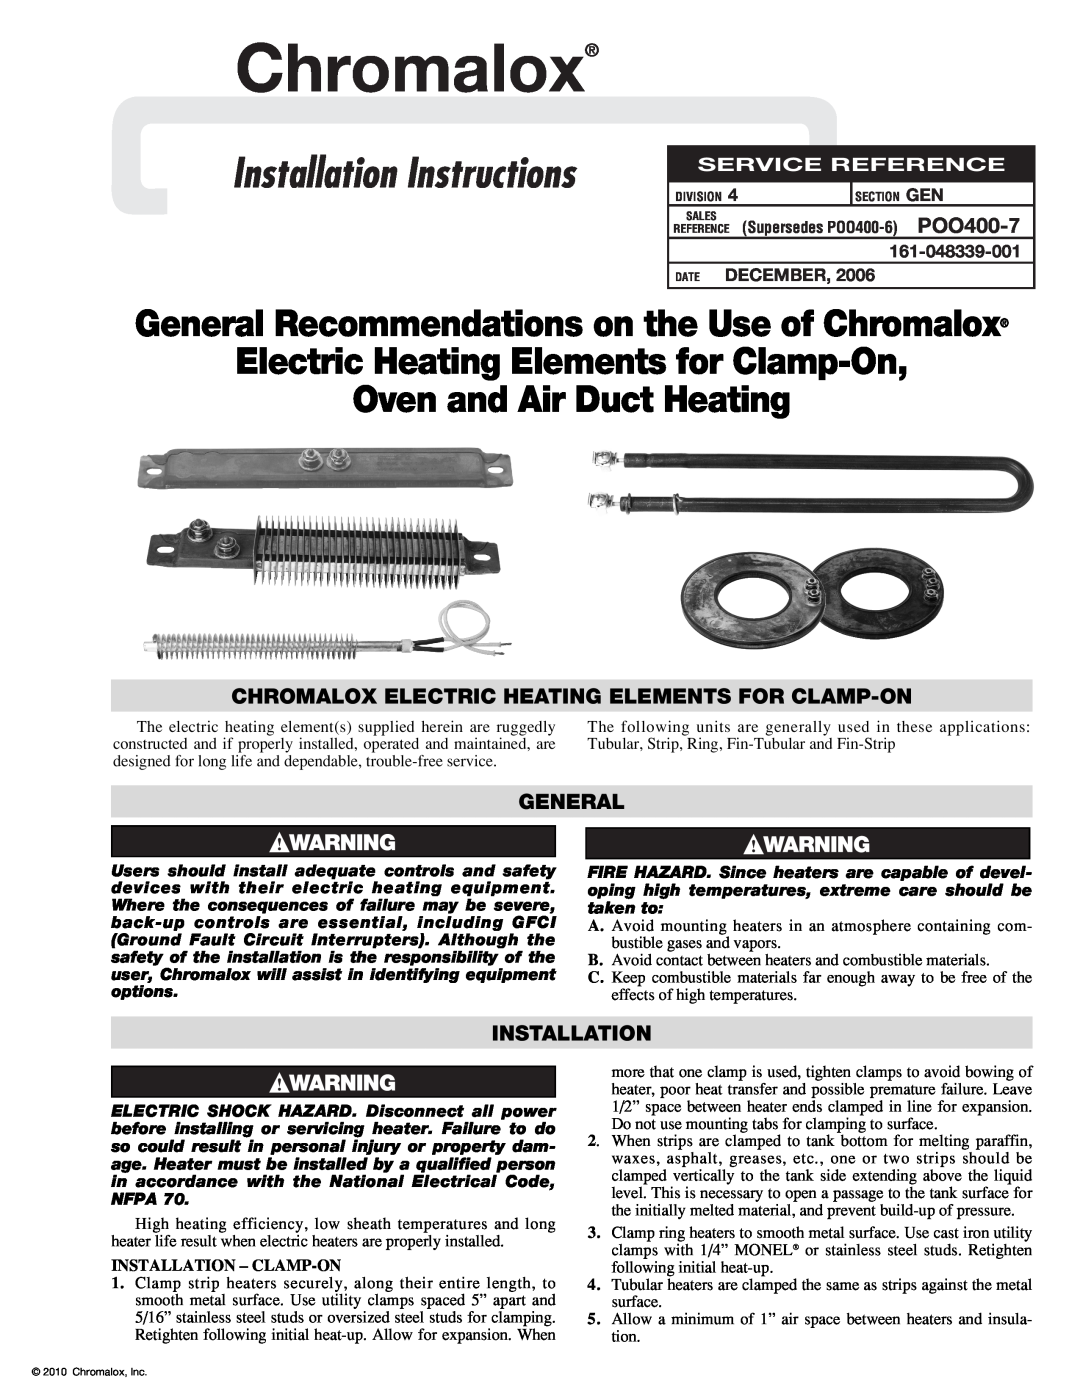 Chromalox POO400-7 installation instructions Chromalox Electric Heating Elements For Clamp-On, General, Installation 